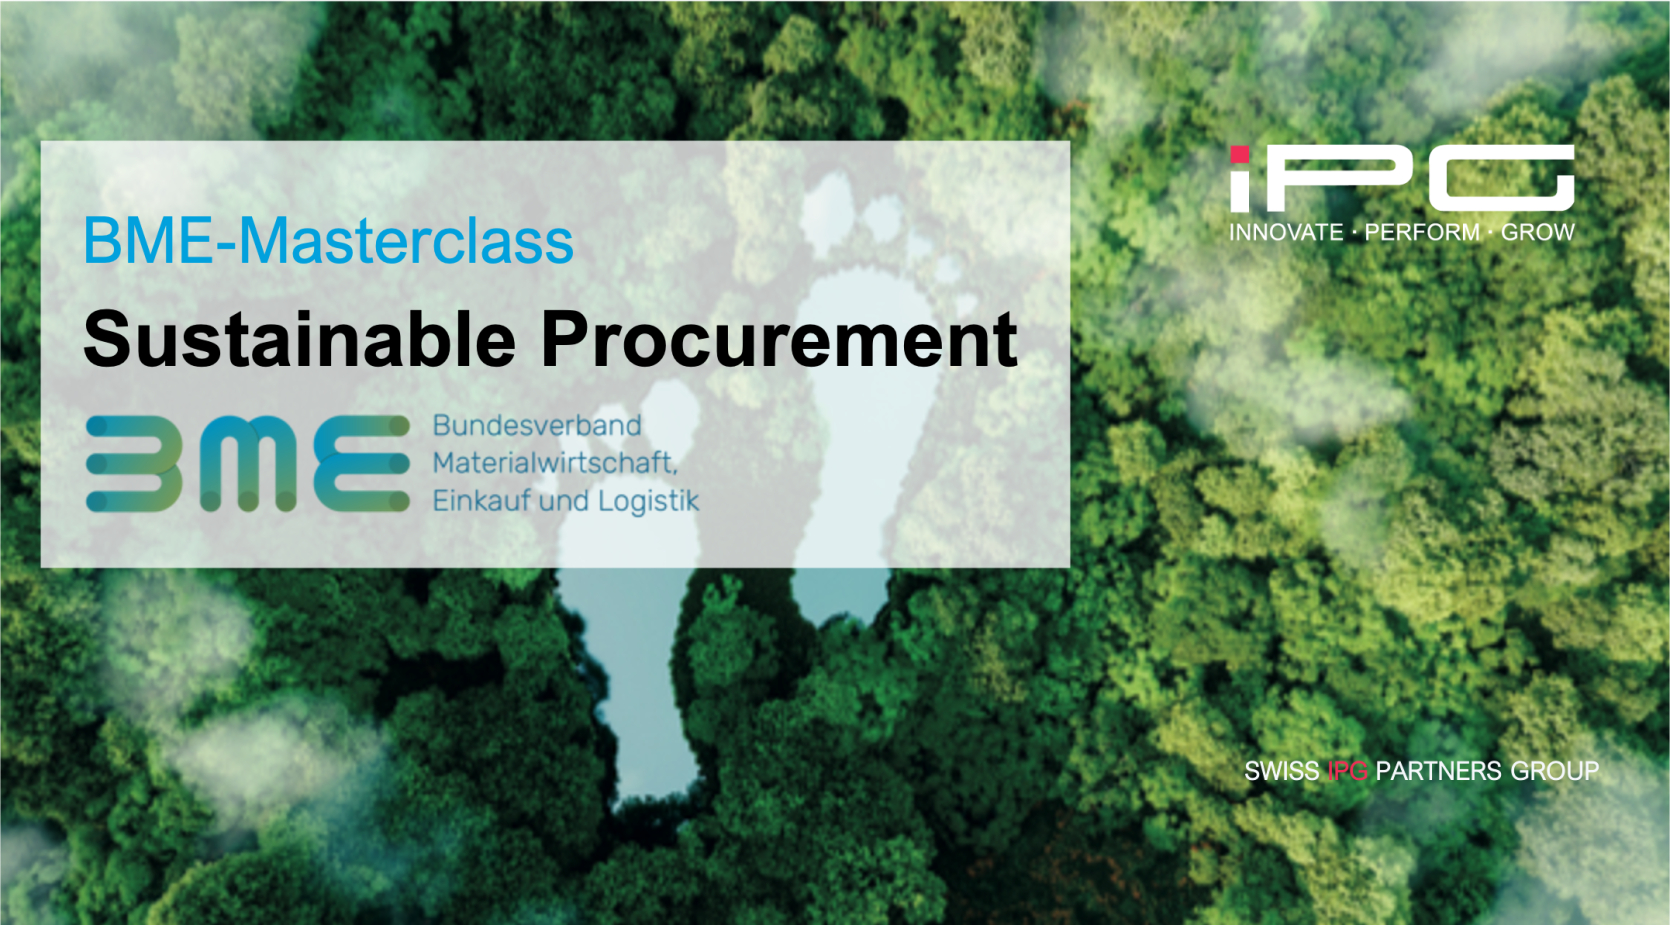 FIRST BME-IPG MASTER CLASS ON SUSTAINABLE PROCUREMENT STARTED SUCCESSFULLY